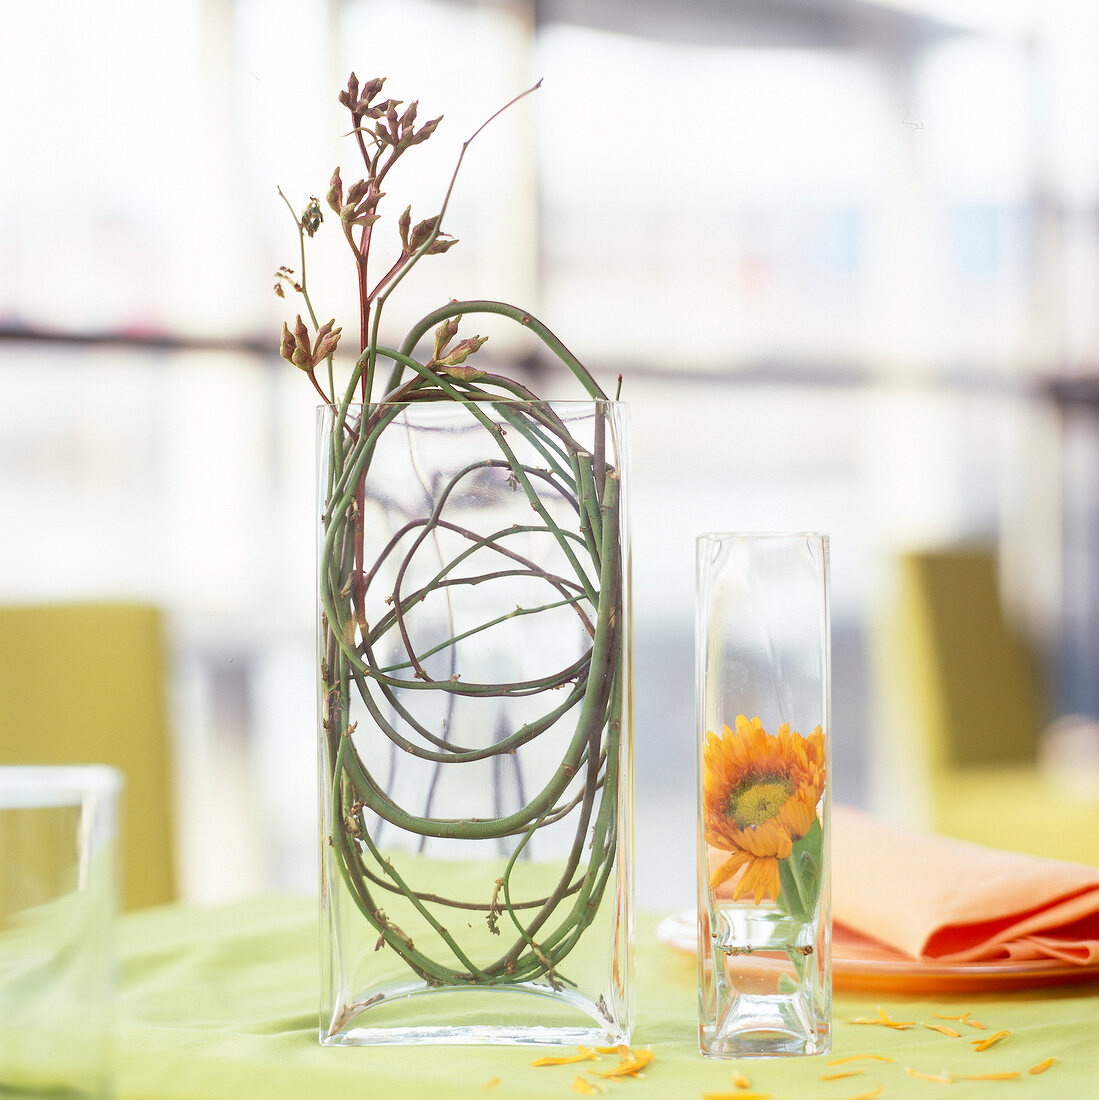 Close-up of flower decorations in glass vase and flower in glass